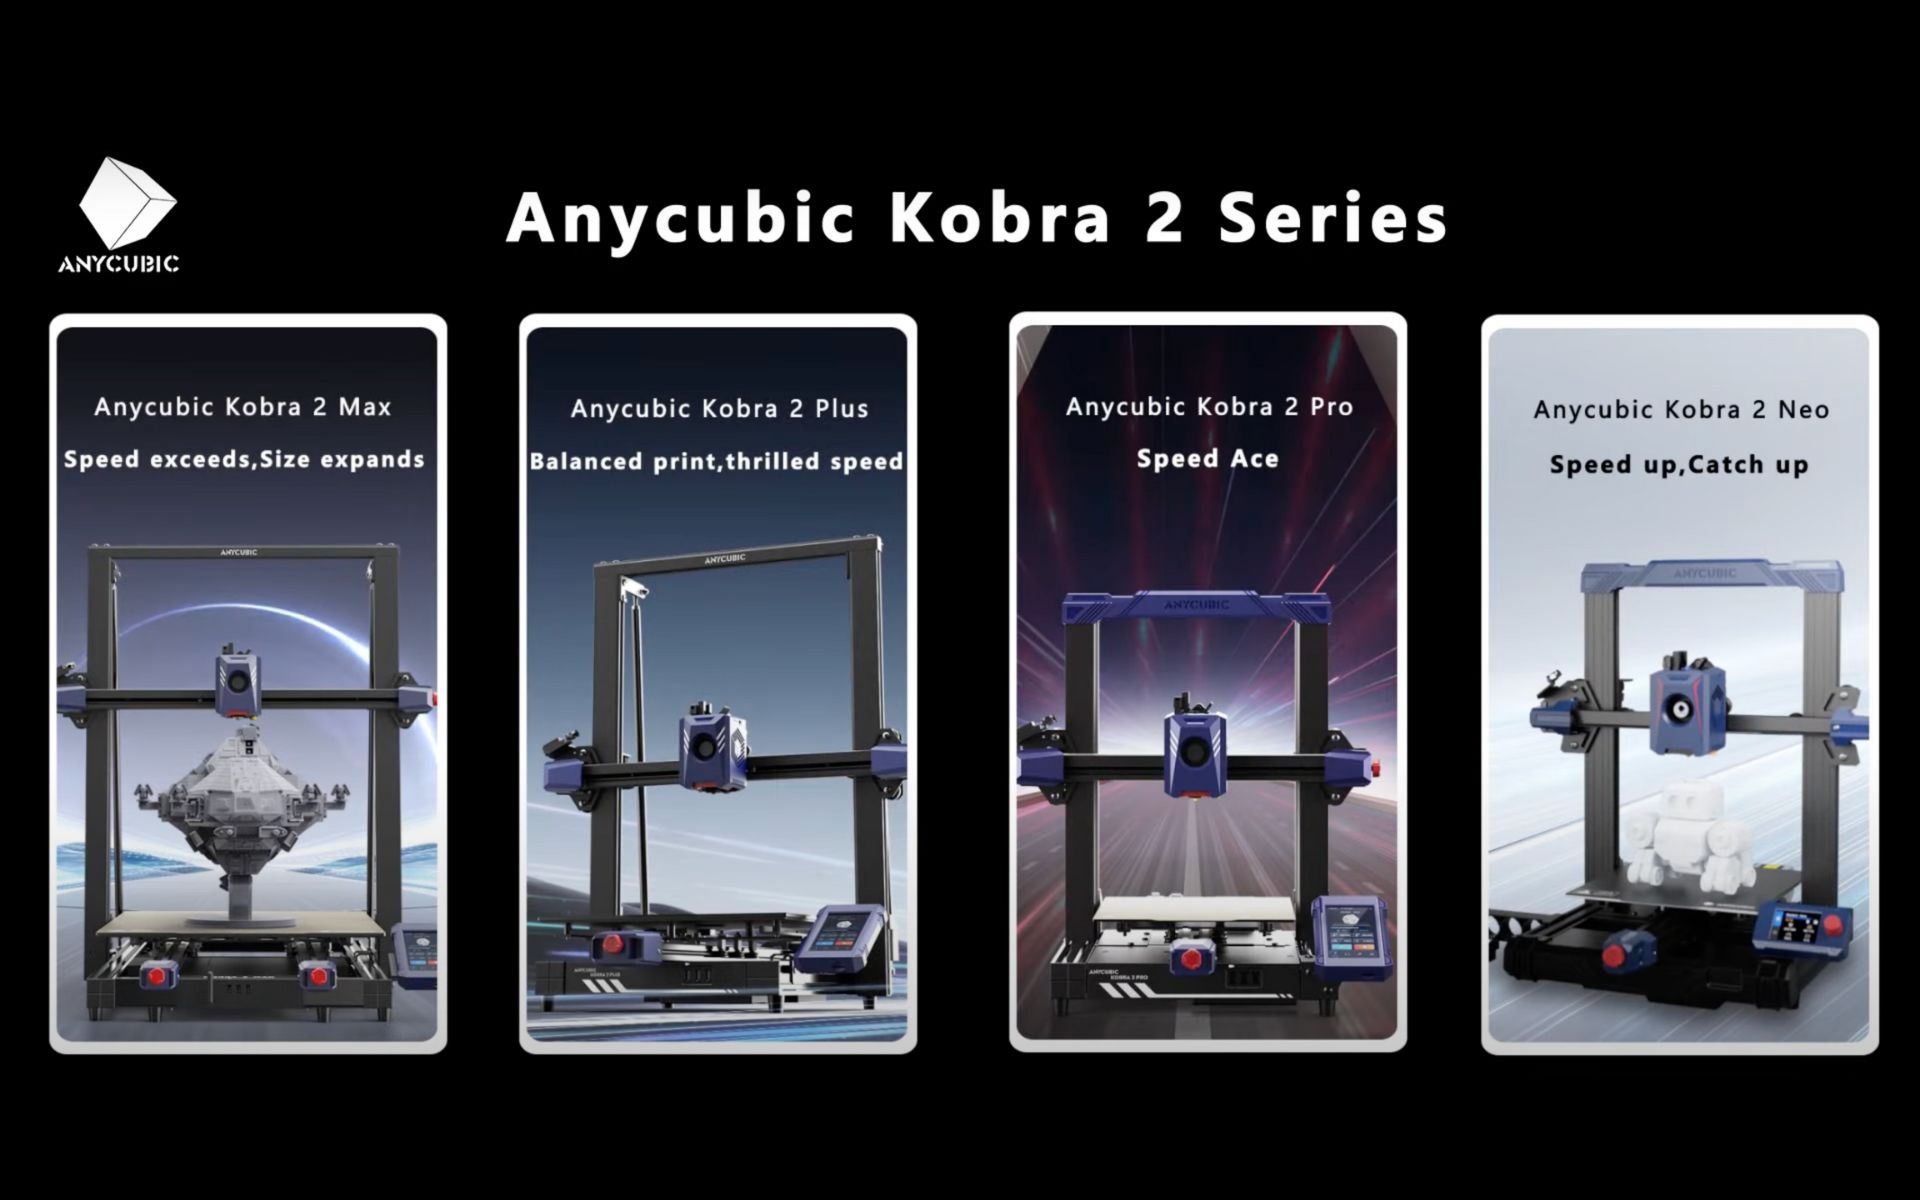 Review of the Anycubic Kobra 2 Max#veteranownedsmallbusiness